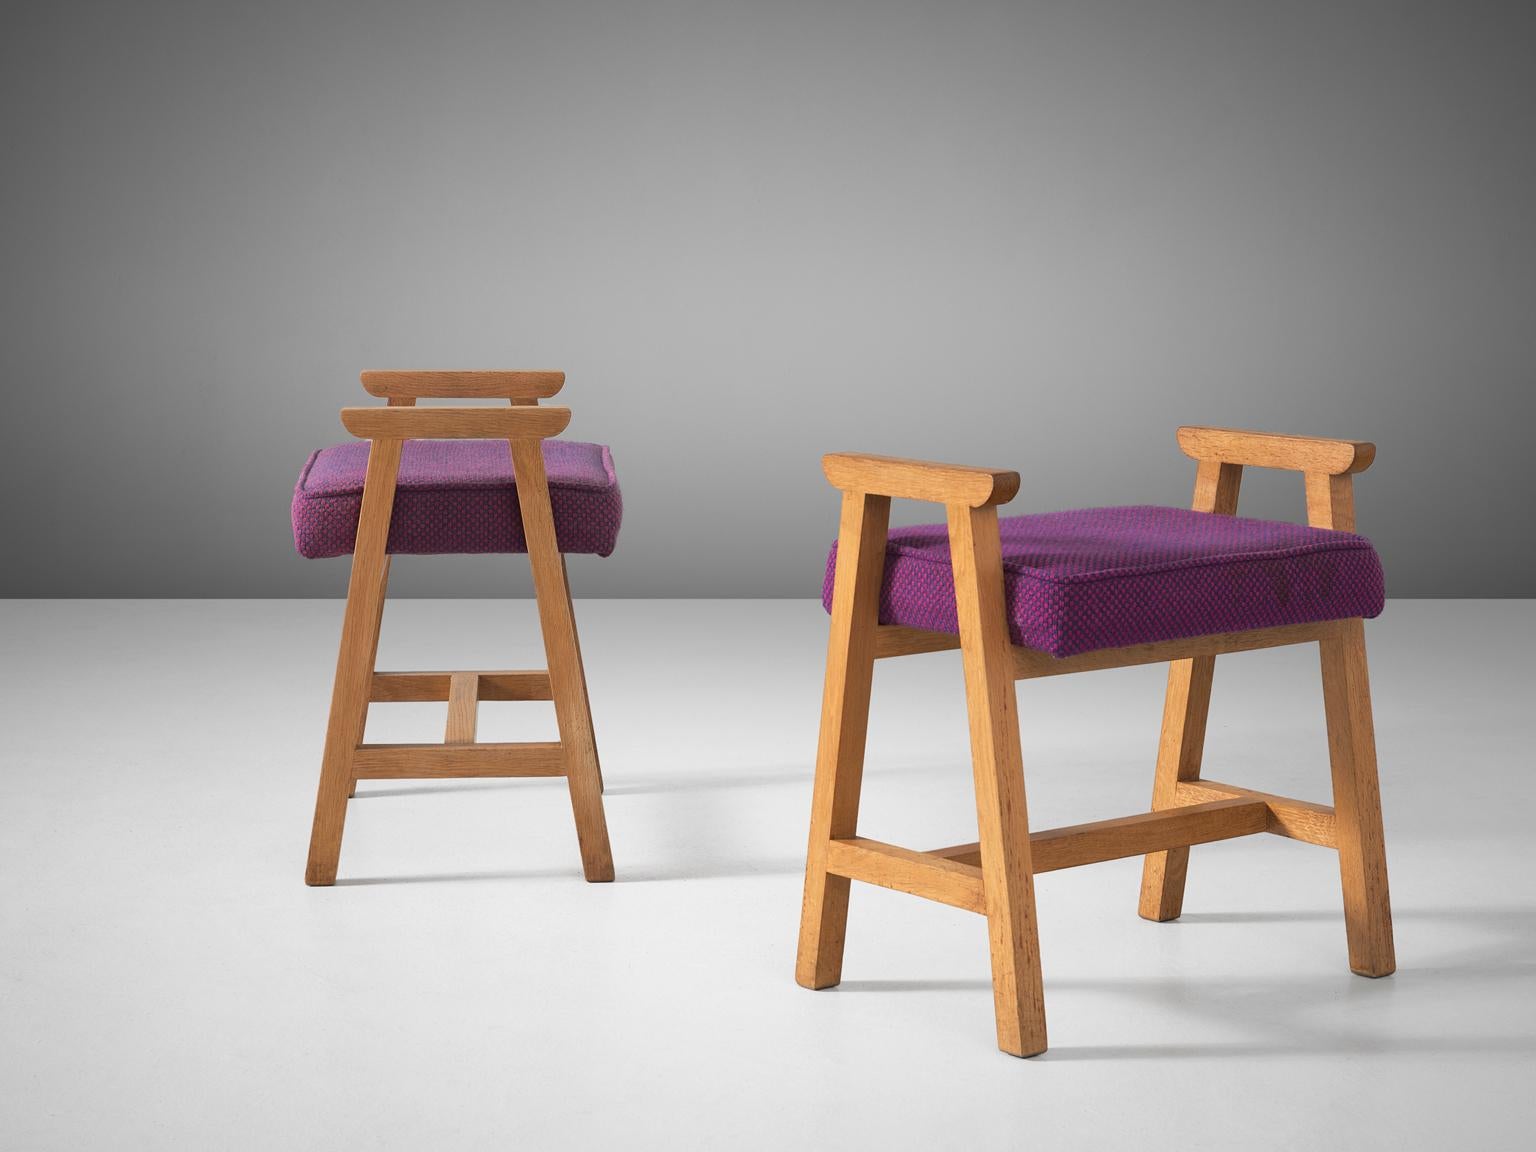 Guillerme et Chambron, set of two stools, oak and purple fabric, France, 1960s. 

This duo of solid oak wooden stools with the muted yellow colors are designed by the French designer duo Guillerme and Chambron. These stools have a frame in oak with